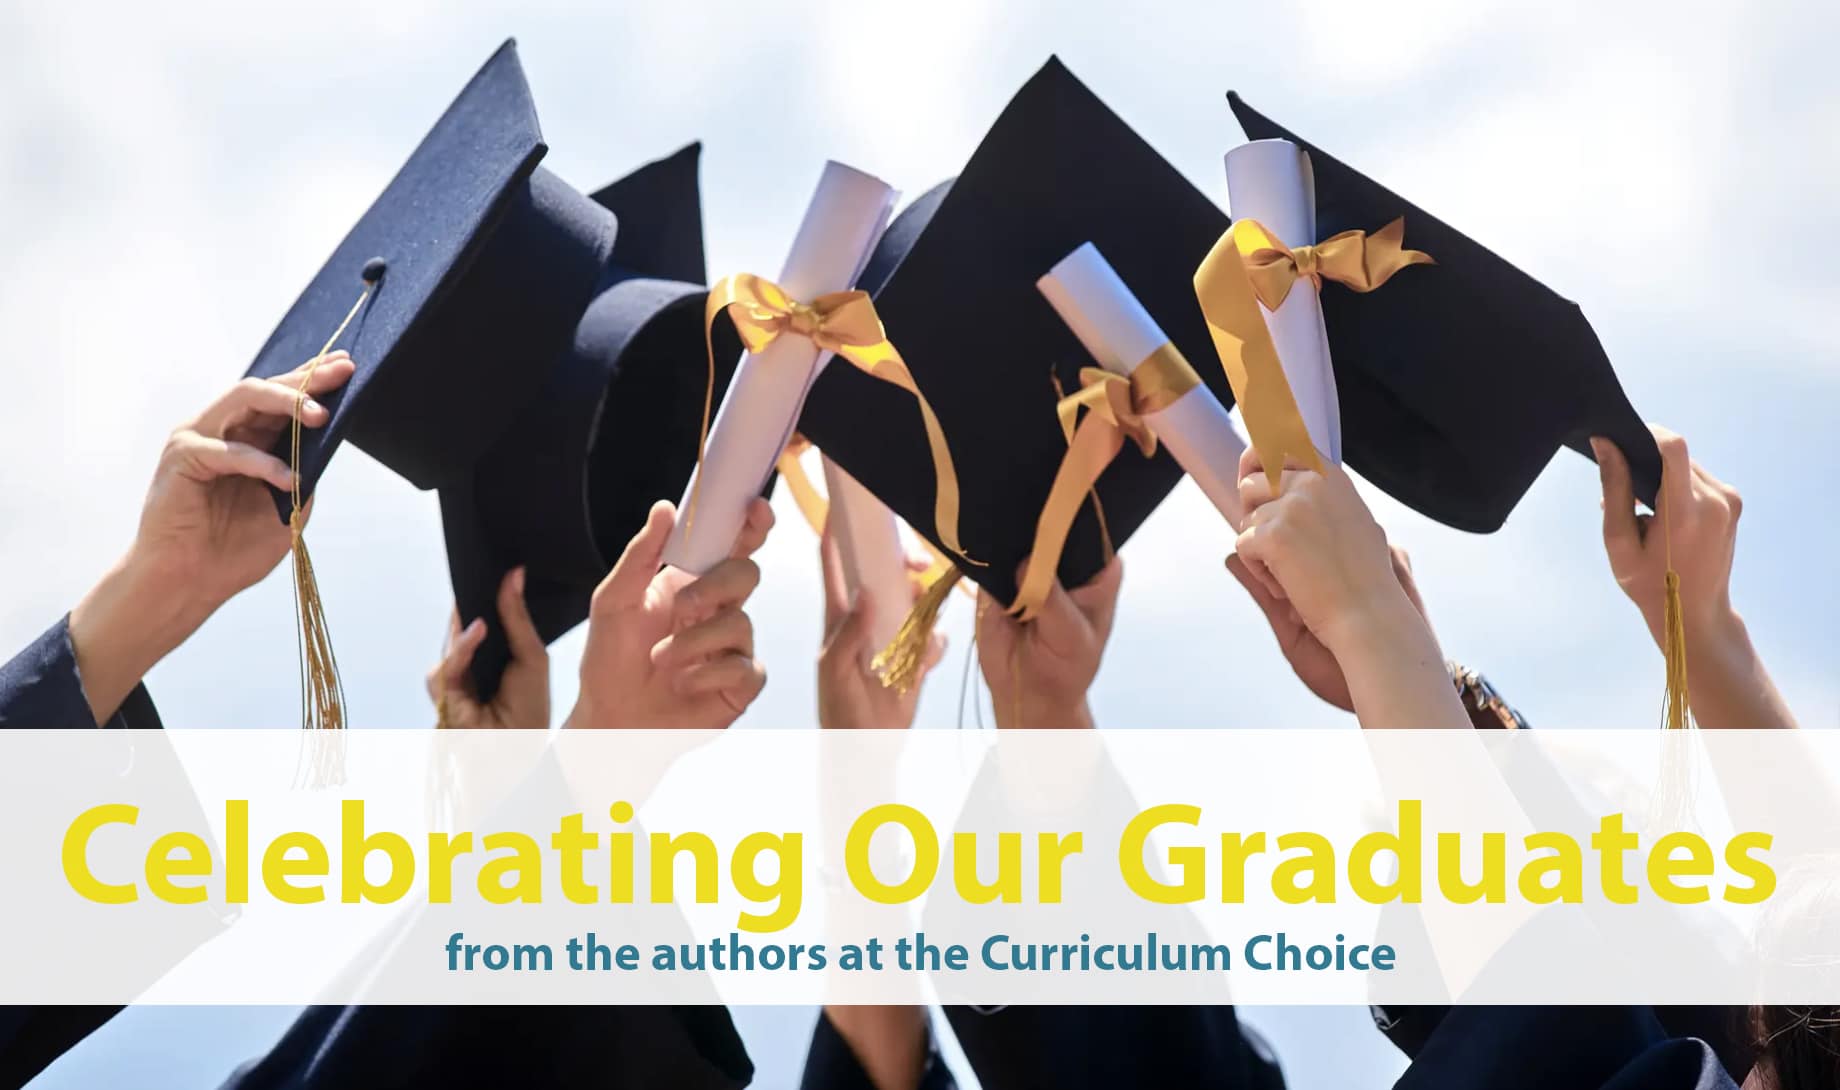 Graduation is nearly upon us and like most families with seniors, homeschool families are giving thought to graduation parties and activities to honor our graduates. Here are ideas for celebrating homeschool graduates from our team of authors.